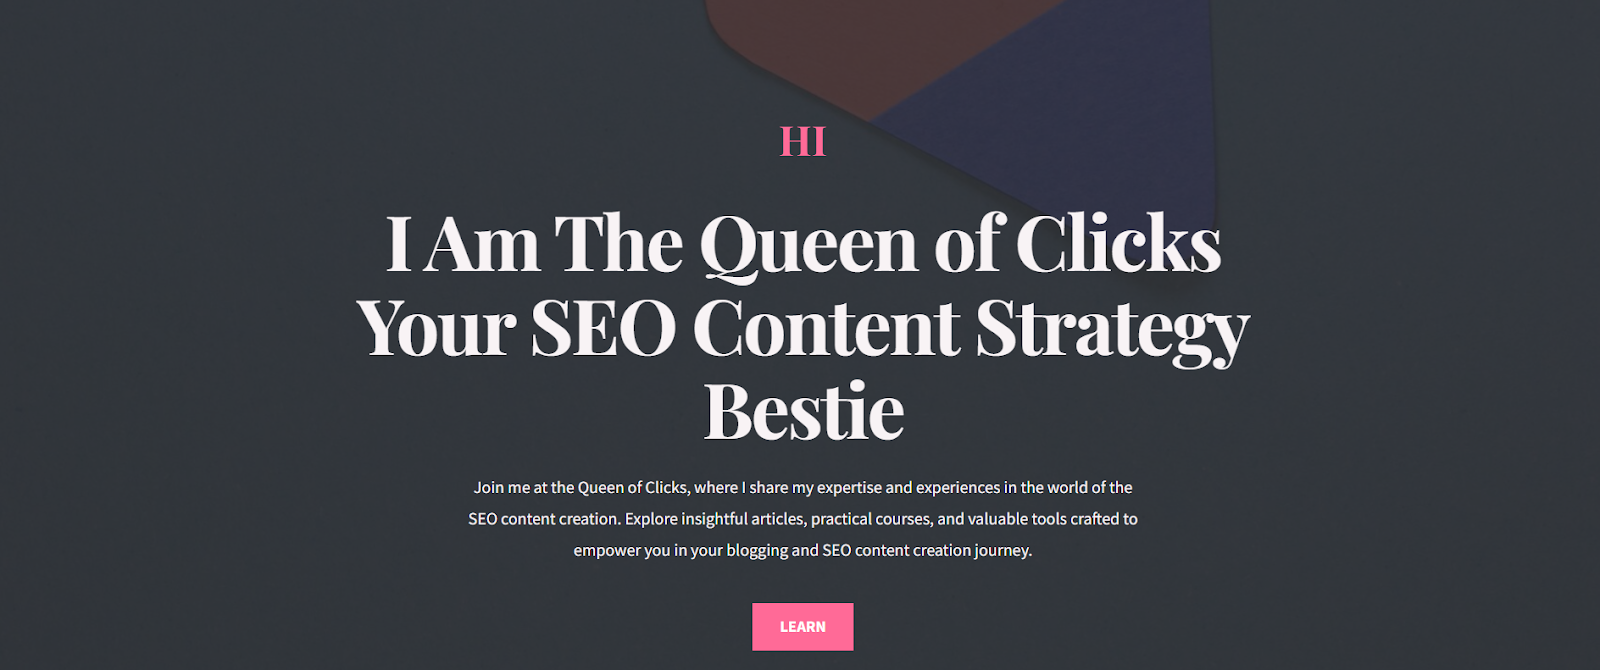 queen of clicks home page as an example of conversion rate optimization best practices